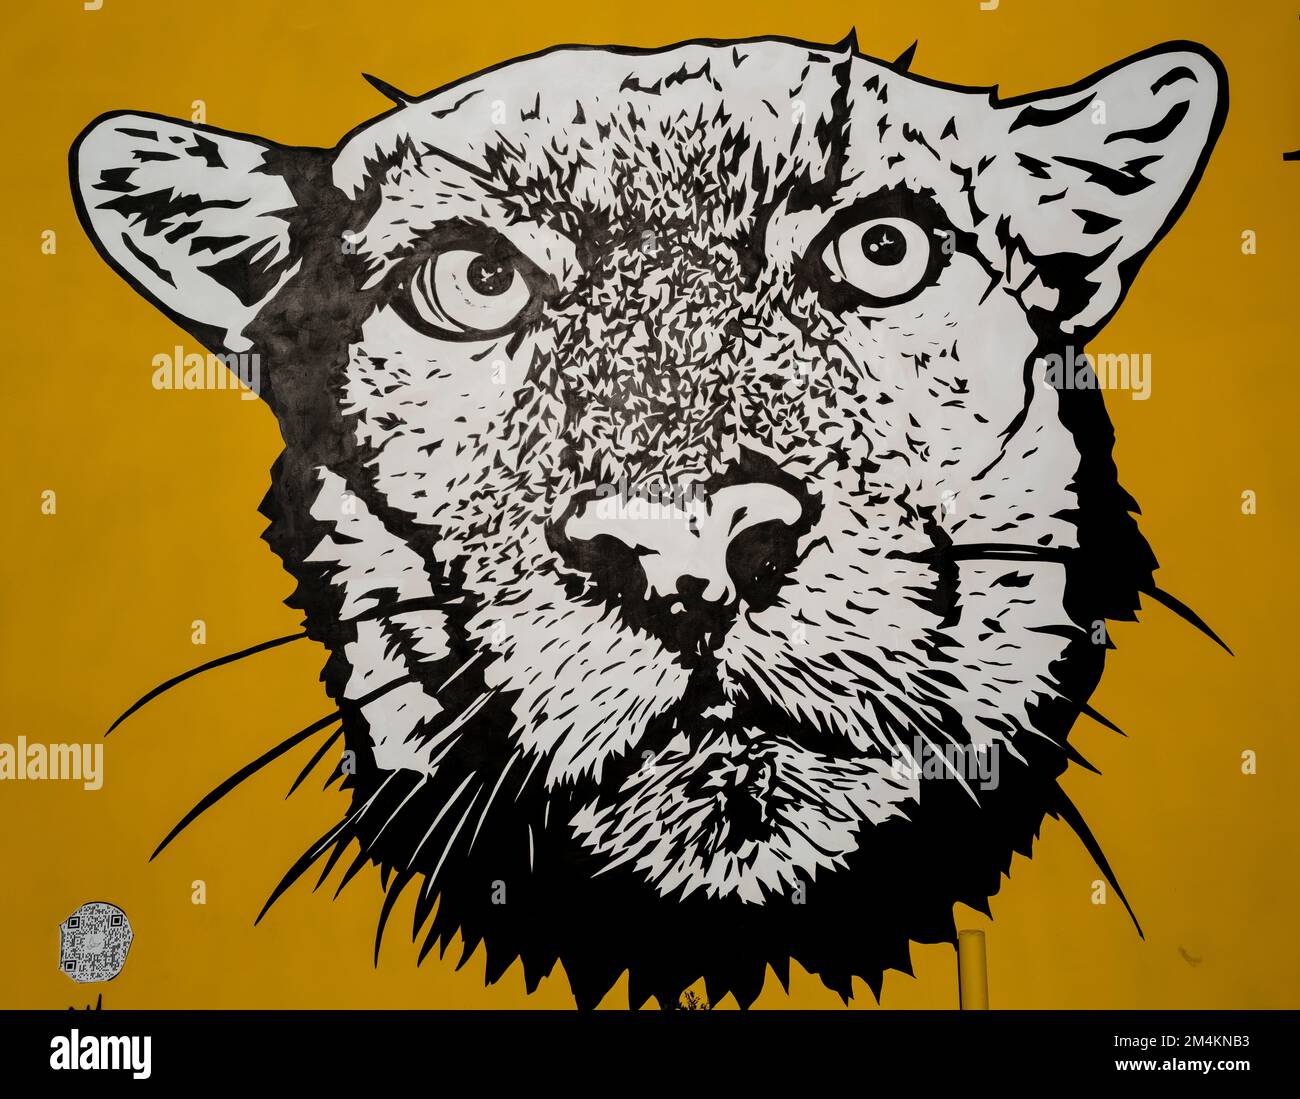 Los Angeles, USA. 21st Dec, 2022. A mural dedicated to P-22, a wild mountain lion living in the Hollywood Hills. P-22 was the beloved unofficial mascot of Los Angeles. The mural was painted by artist Corie Mattie on the side of Hype Fitness building in Silverlake. The mural was created for the #savelacougars campaign to help wild big cats from extinction. P-22 was euthanized earlier last week after suffering from injuries from getting hit by a vehicle. 12/21/2022 Los Angeles, CA., USA. (Photo by Ted Soqui/SIPA USA) Credit: Sipa USA/Alamy Live News Stock Photo